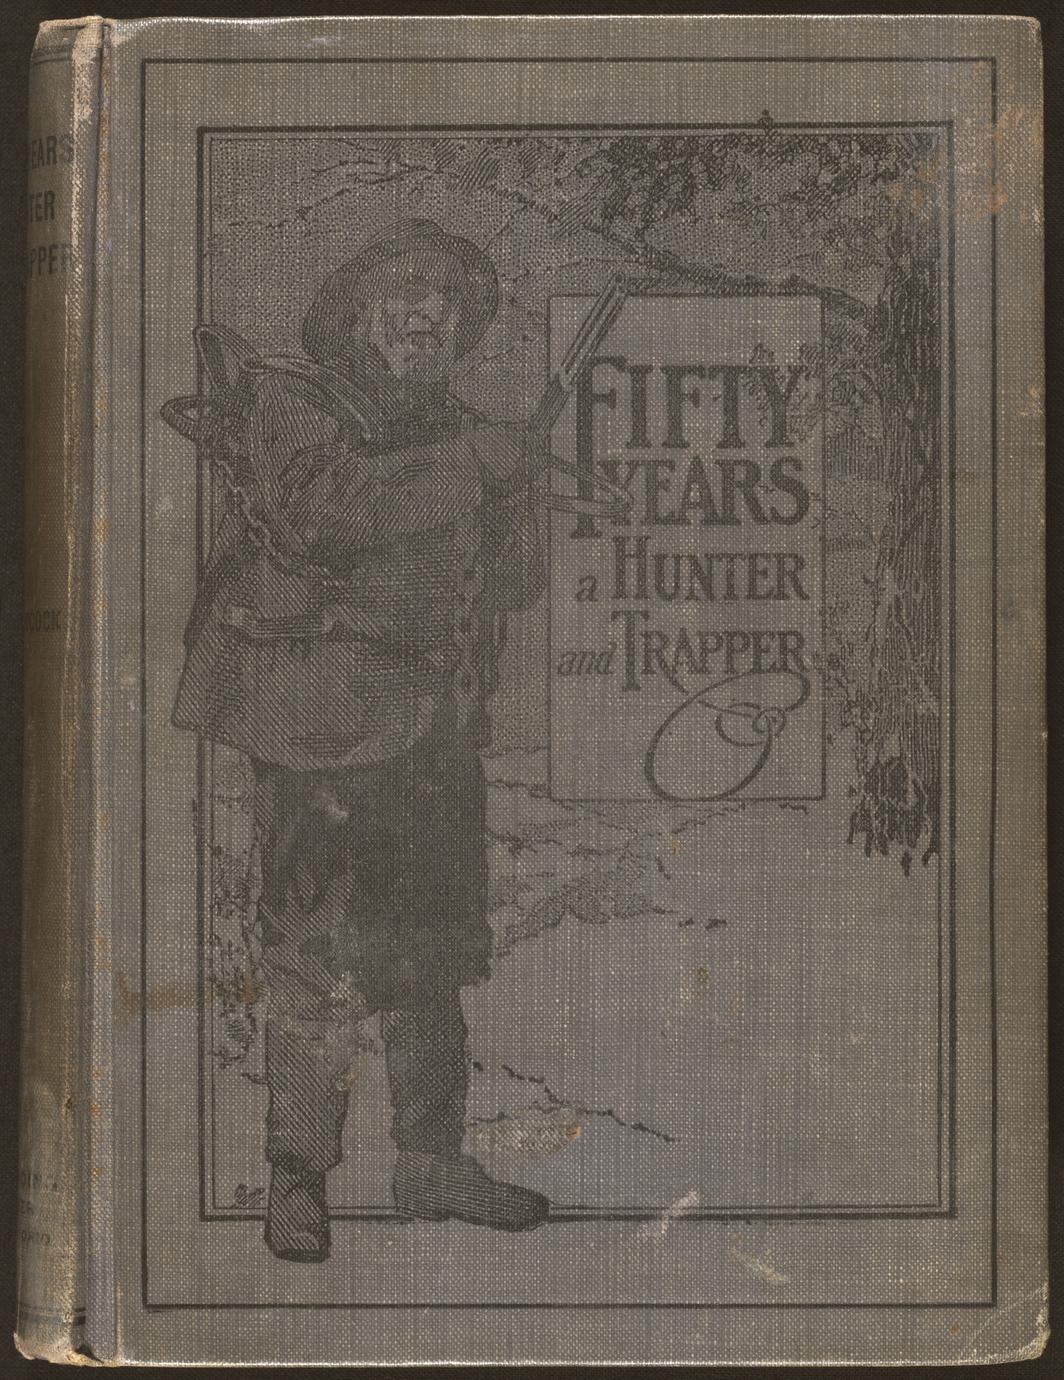 Fifty years a hunter and trapper : experiences and observations of E. N. Woodcock, the noted hunter and trapper (1 of 2)